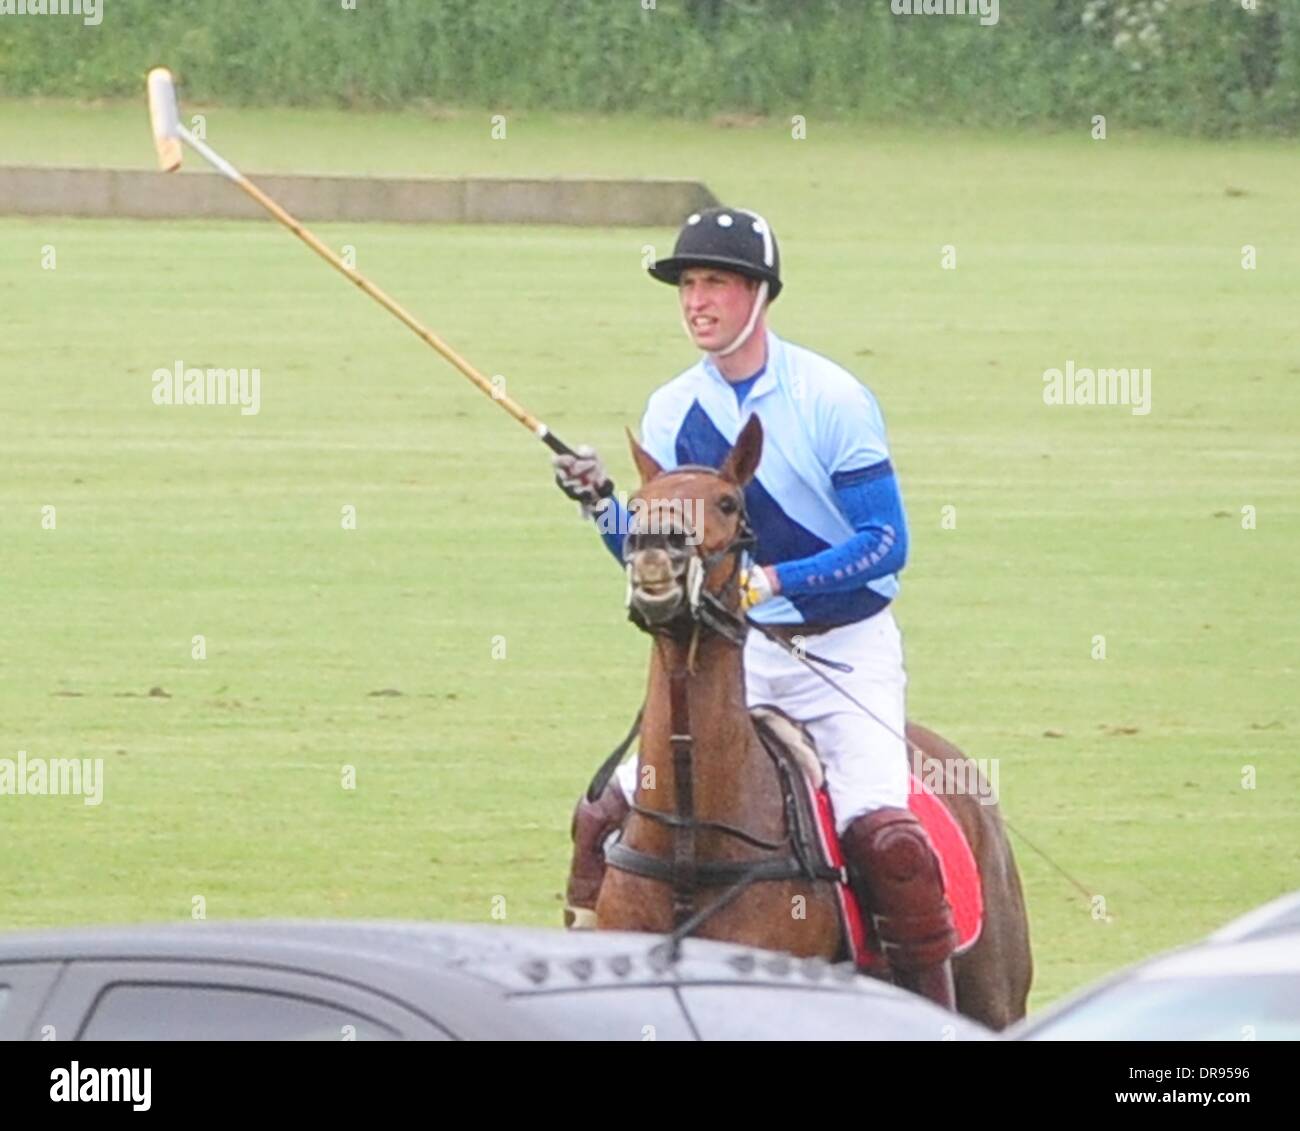 Prince William, Duke of Cambridge iis seen playing a polo match in Gloucester Gloucestershire, England - 16.06.12 Stock Photo